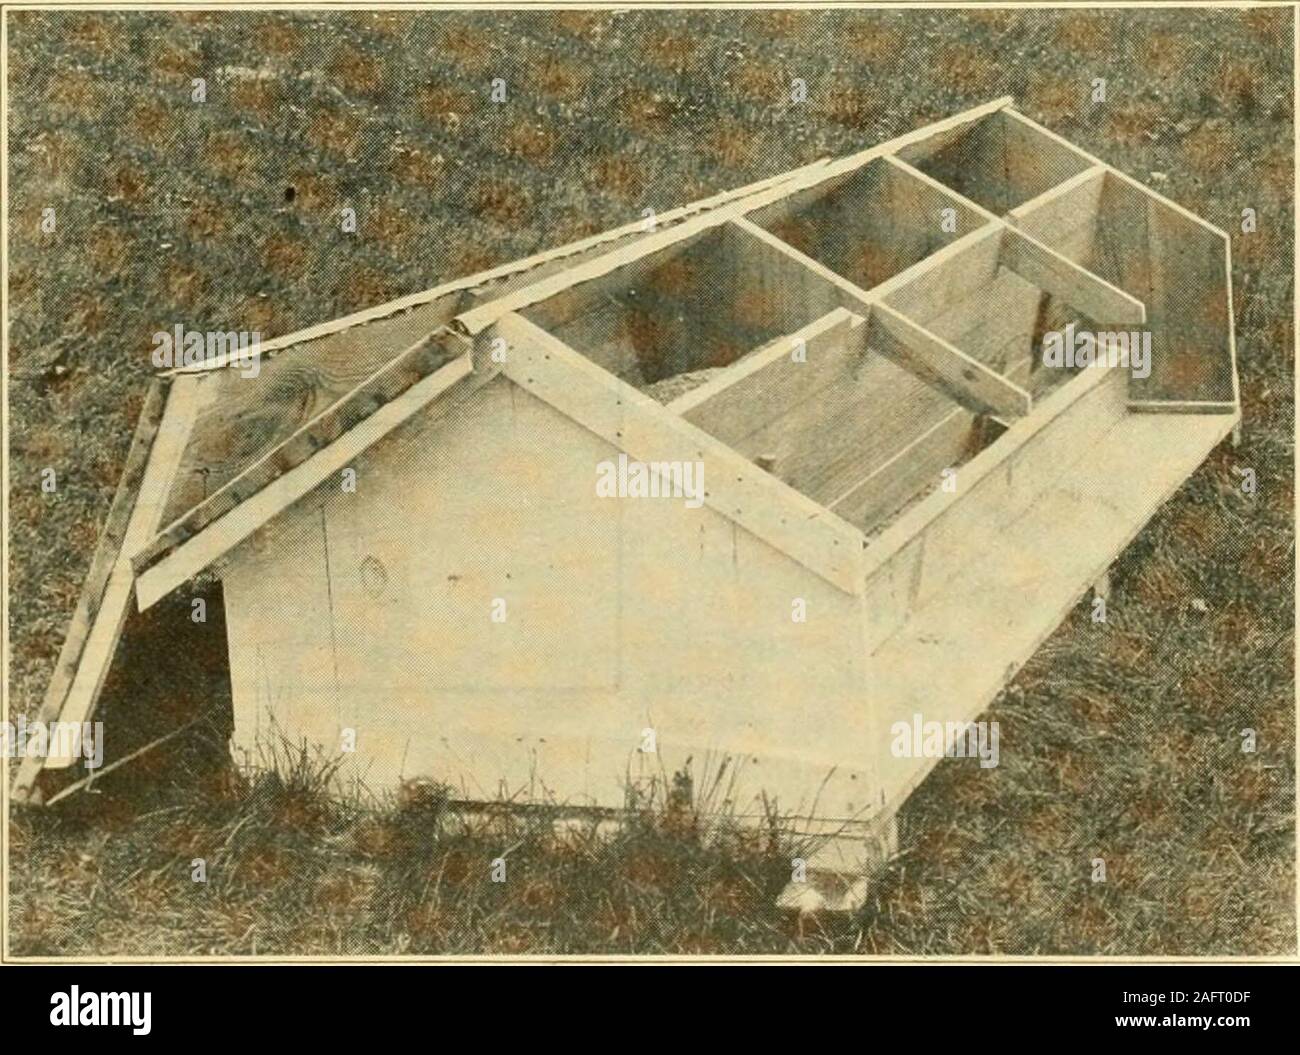 . Poultry houses and fixtures. How to lay out poultry plants ... FIG. 227—OUTDOOR COOP FOR BROODING HE.N.S ness develops they can be broken up more quickly andwill be ready to start laying again in much shorter timethan will be the case if they are allowed to sit for severaldays before being placed in confinement. The best wayto break them up is to confine them to a suitable coopsuch as the one shown in Fig. 227. In warm weather it is more satisfactory, as a rule,to have the broody hens confined to these outdoor coopsrather than indoor coops such as are illustrated on page9L This outdoor coop Stock Photo